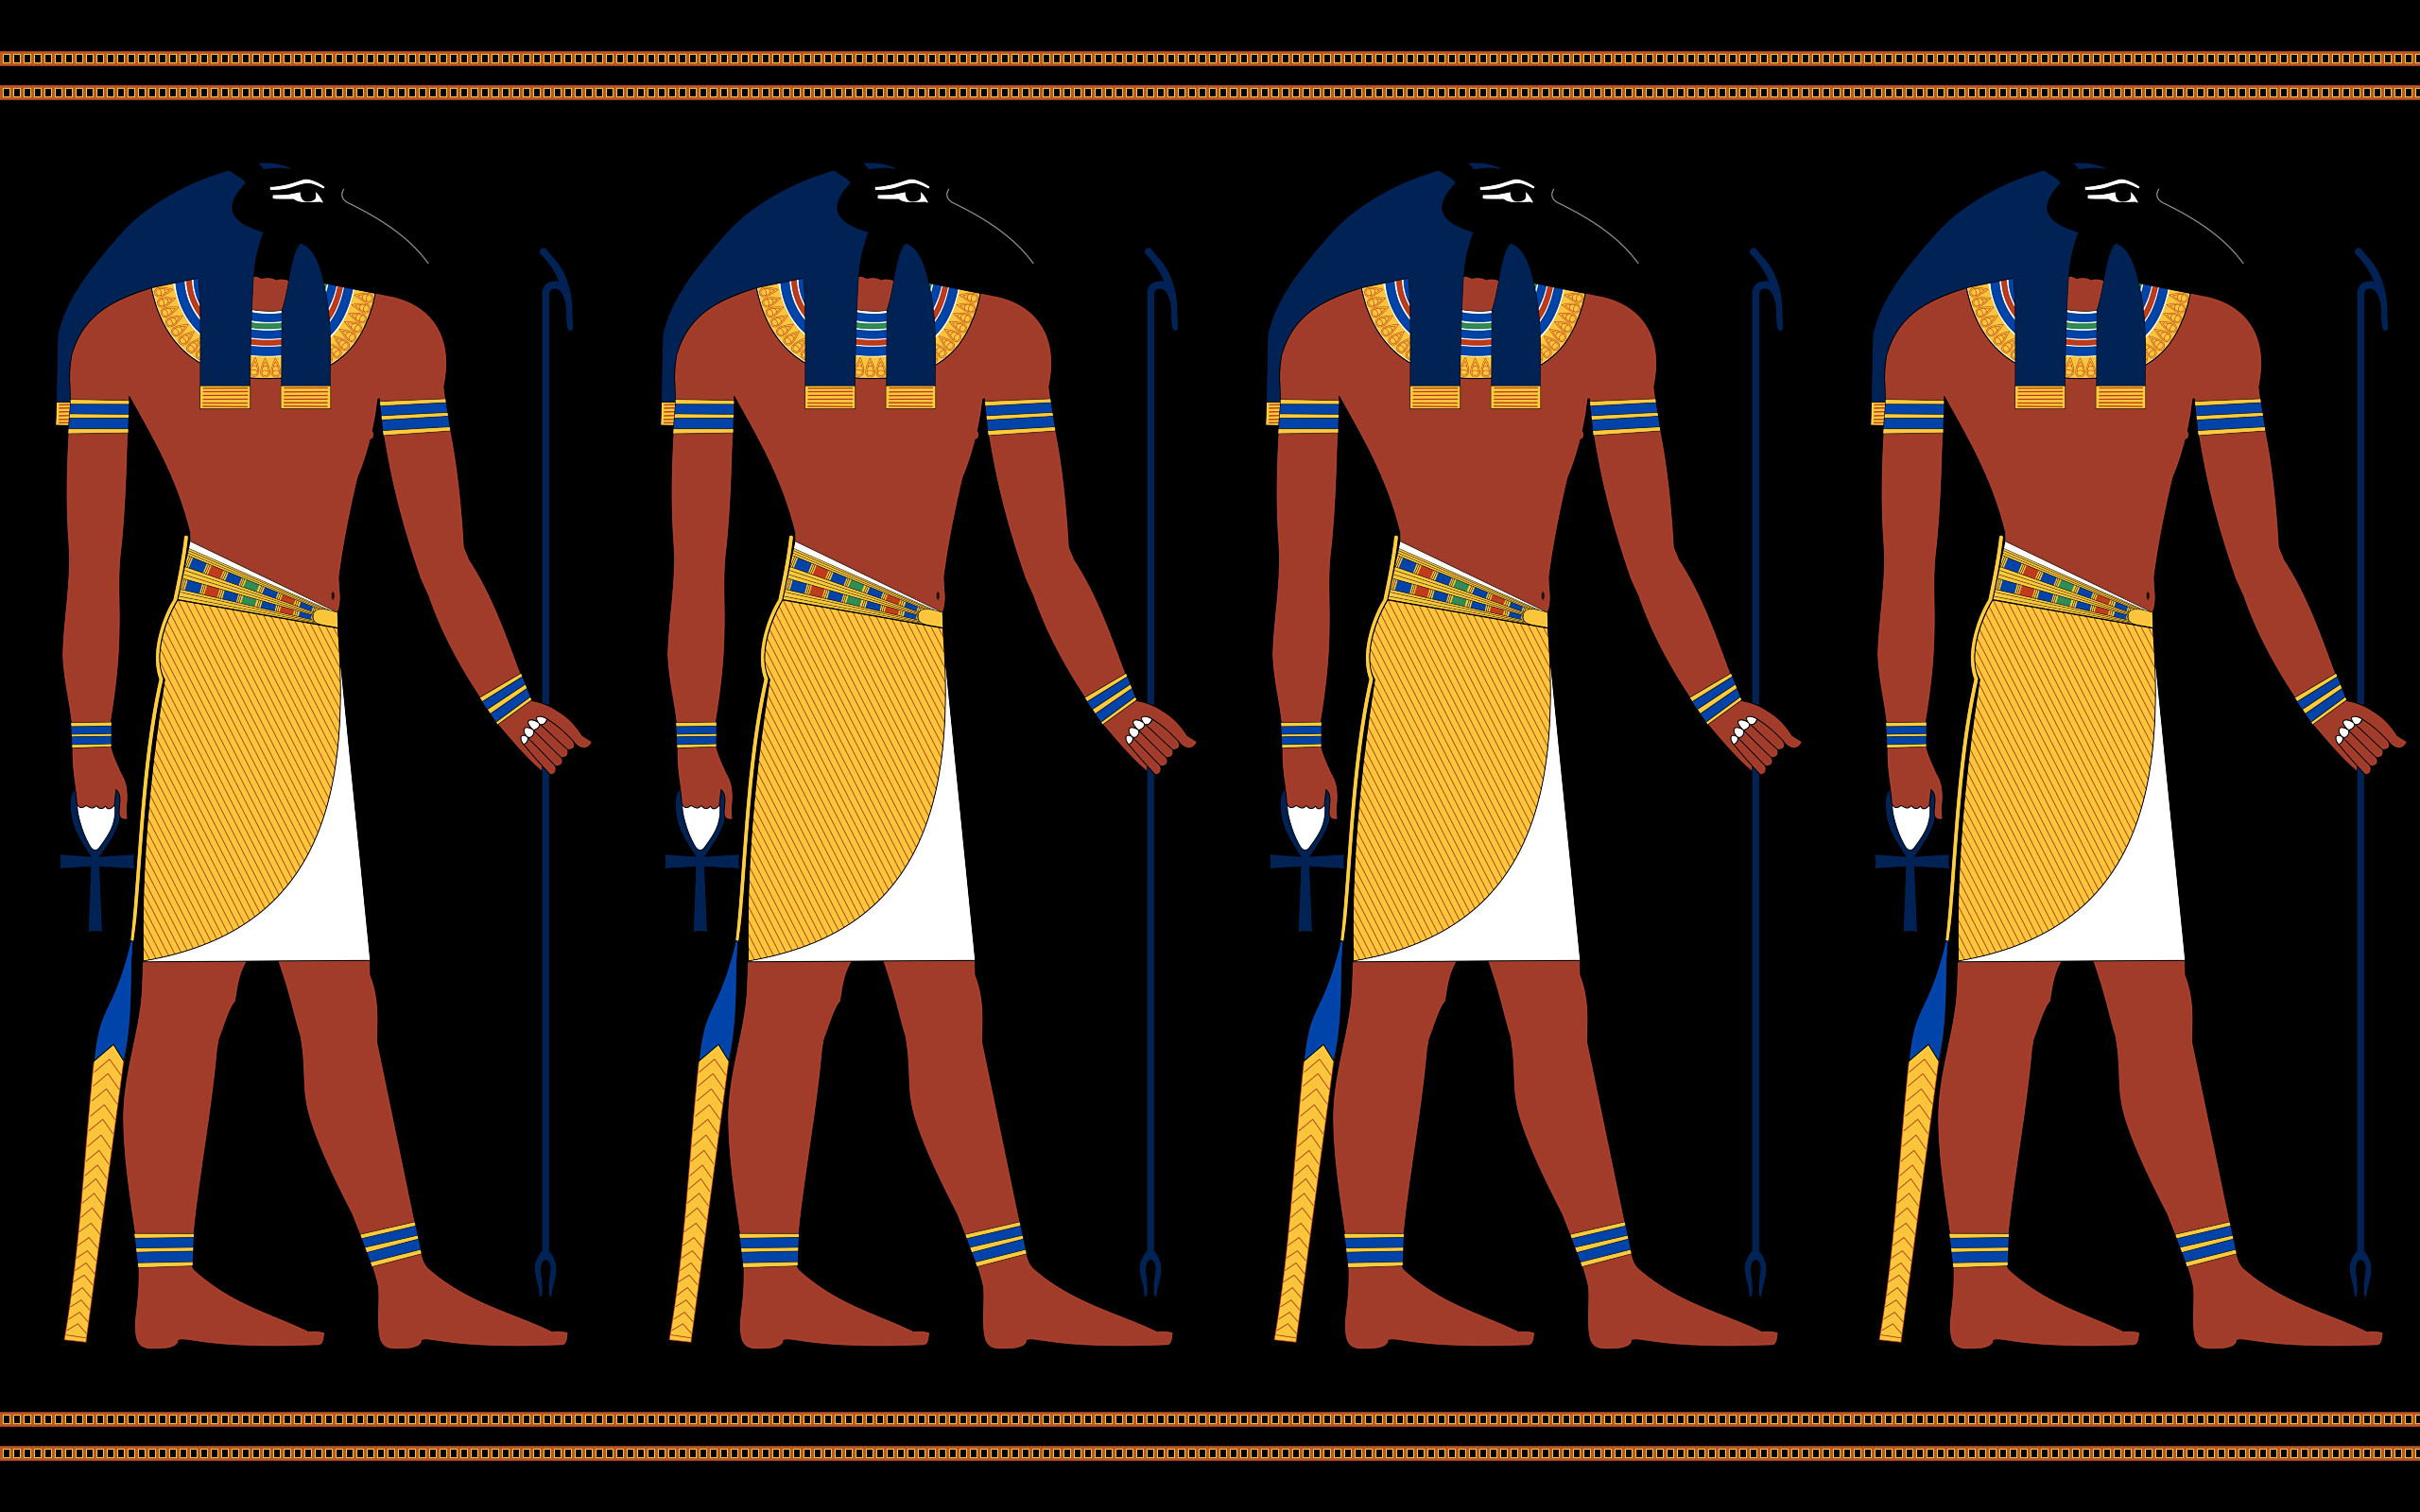 Artistic Egyptian HD Wallpaper | Background Image